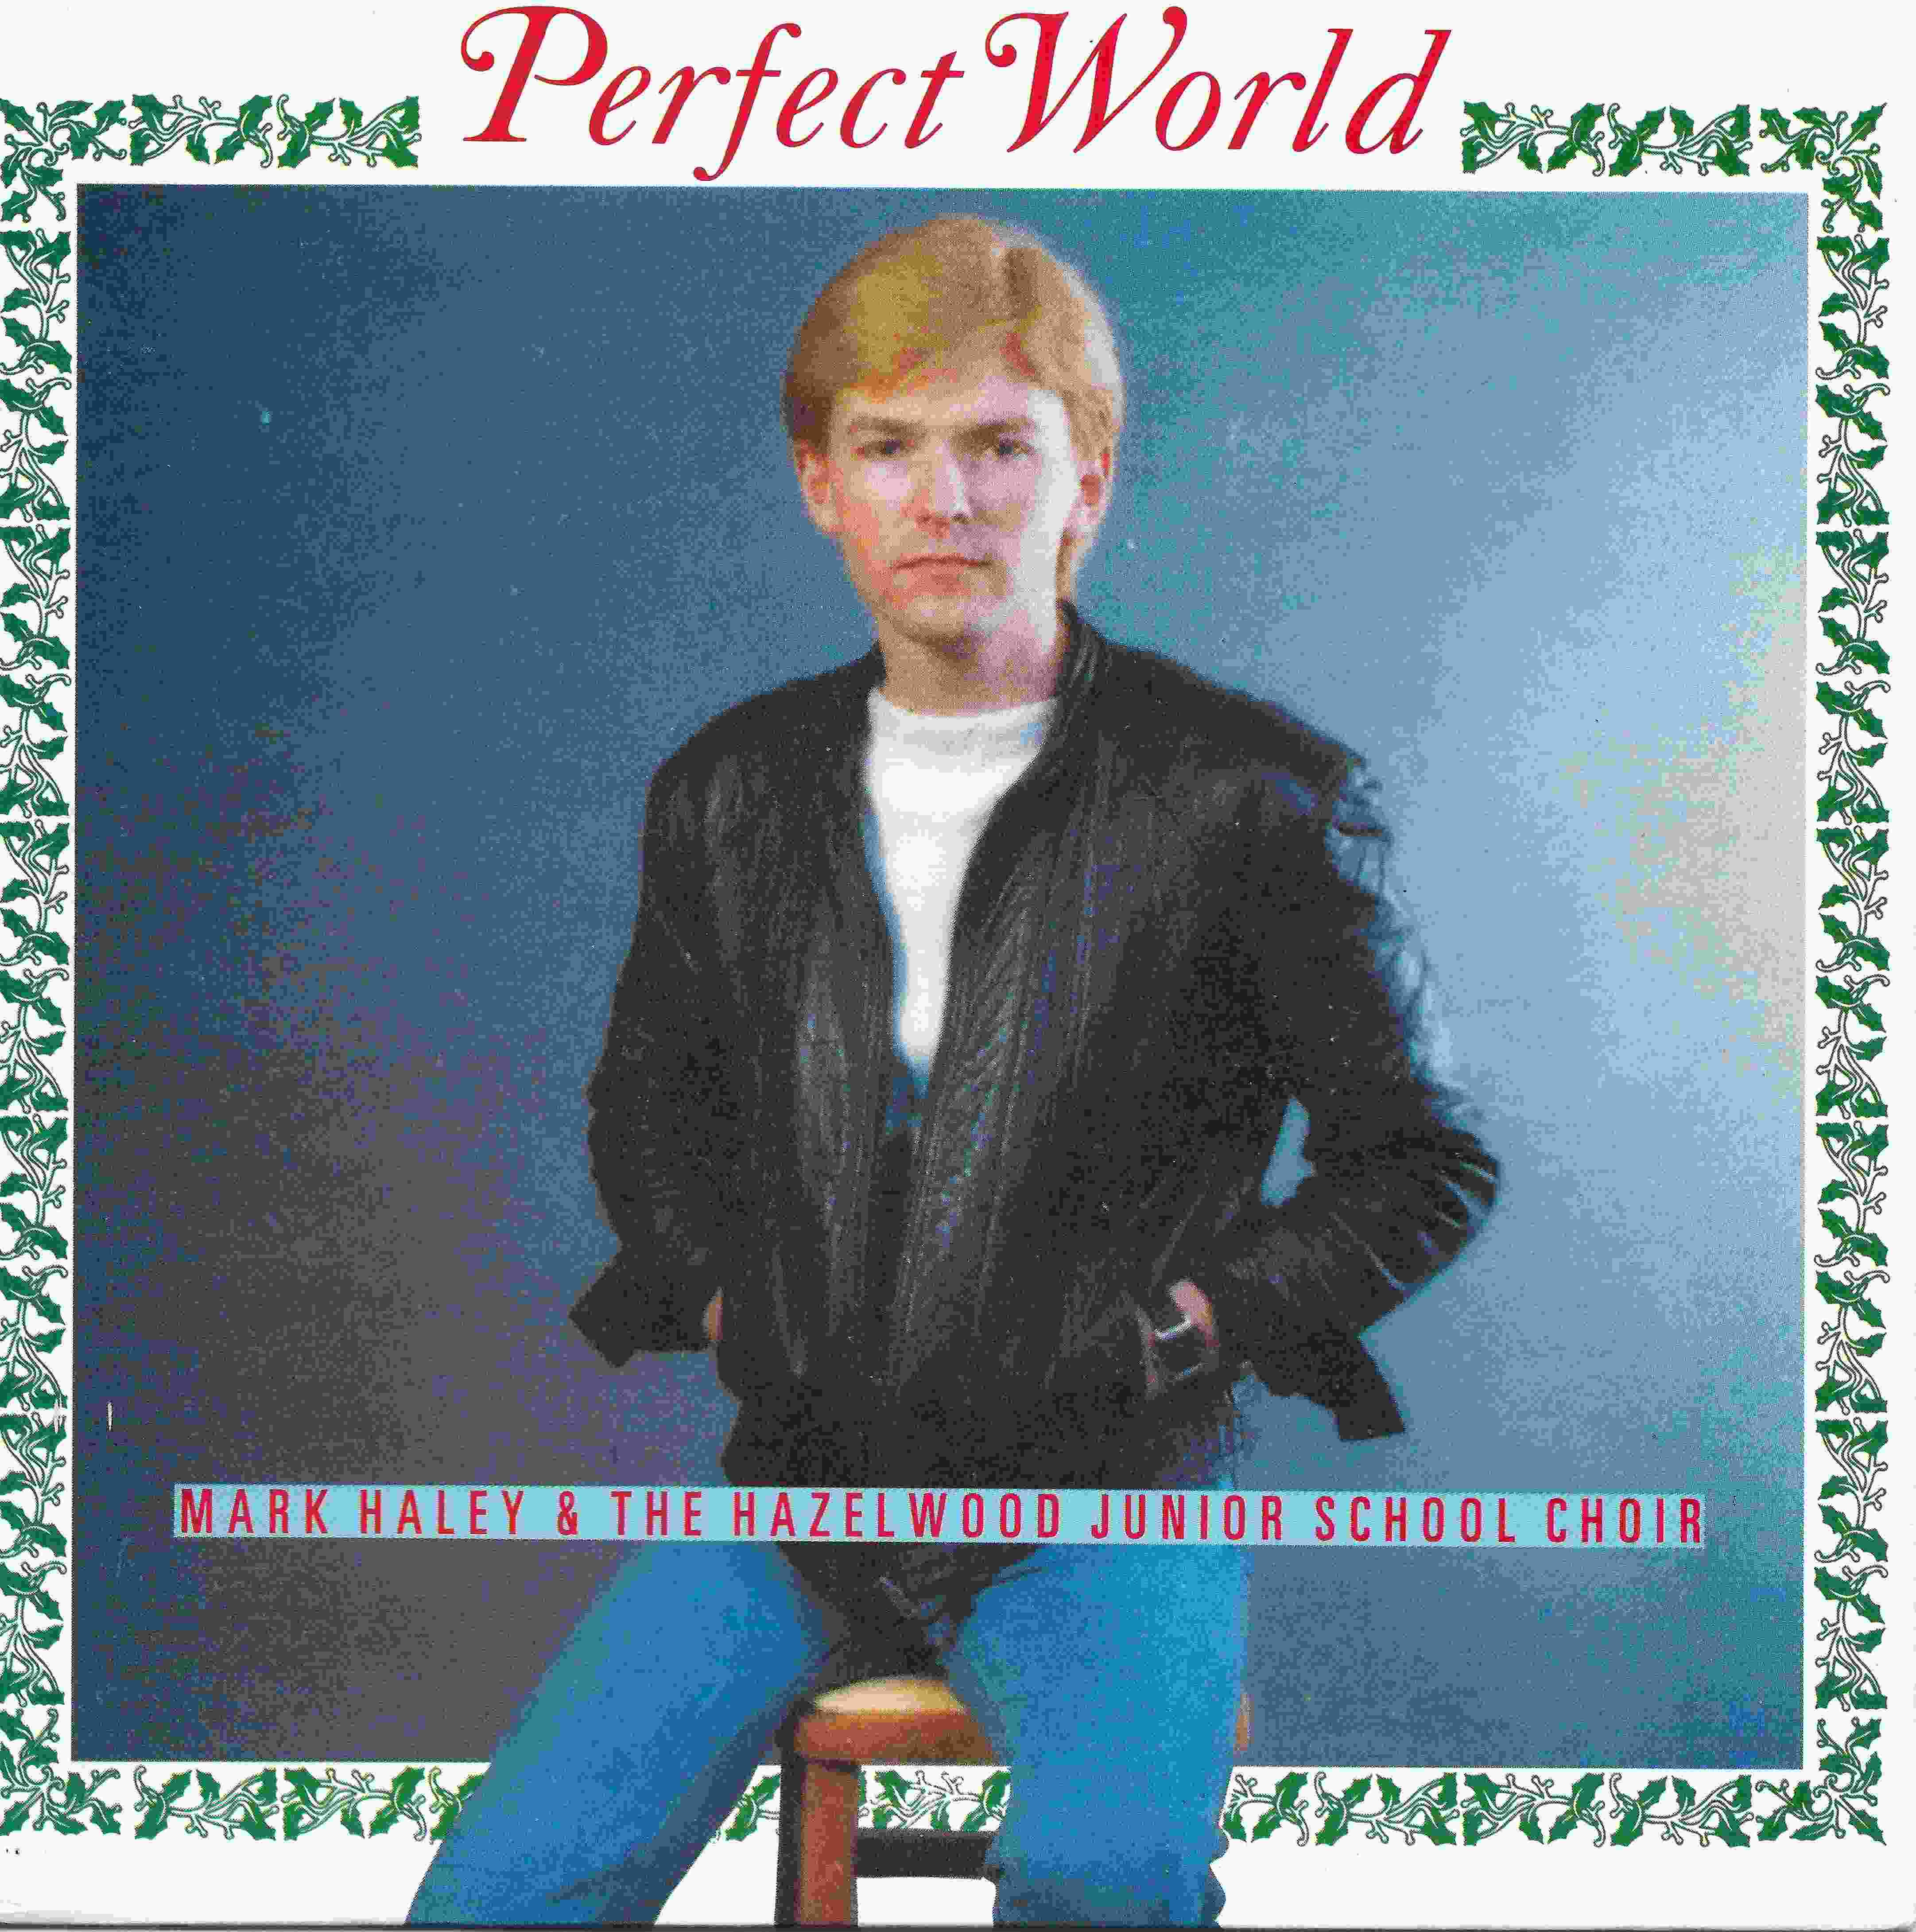 Picture of RESL 235 Perfect world by artist Mark Haley \& The Hazlewood Junior School Choir from the BBC records and Tapes library